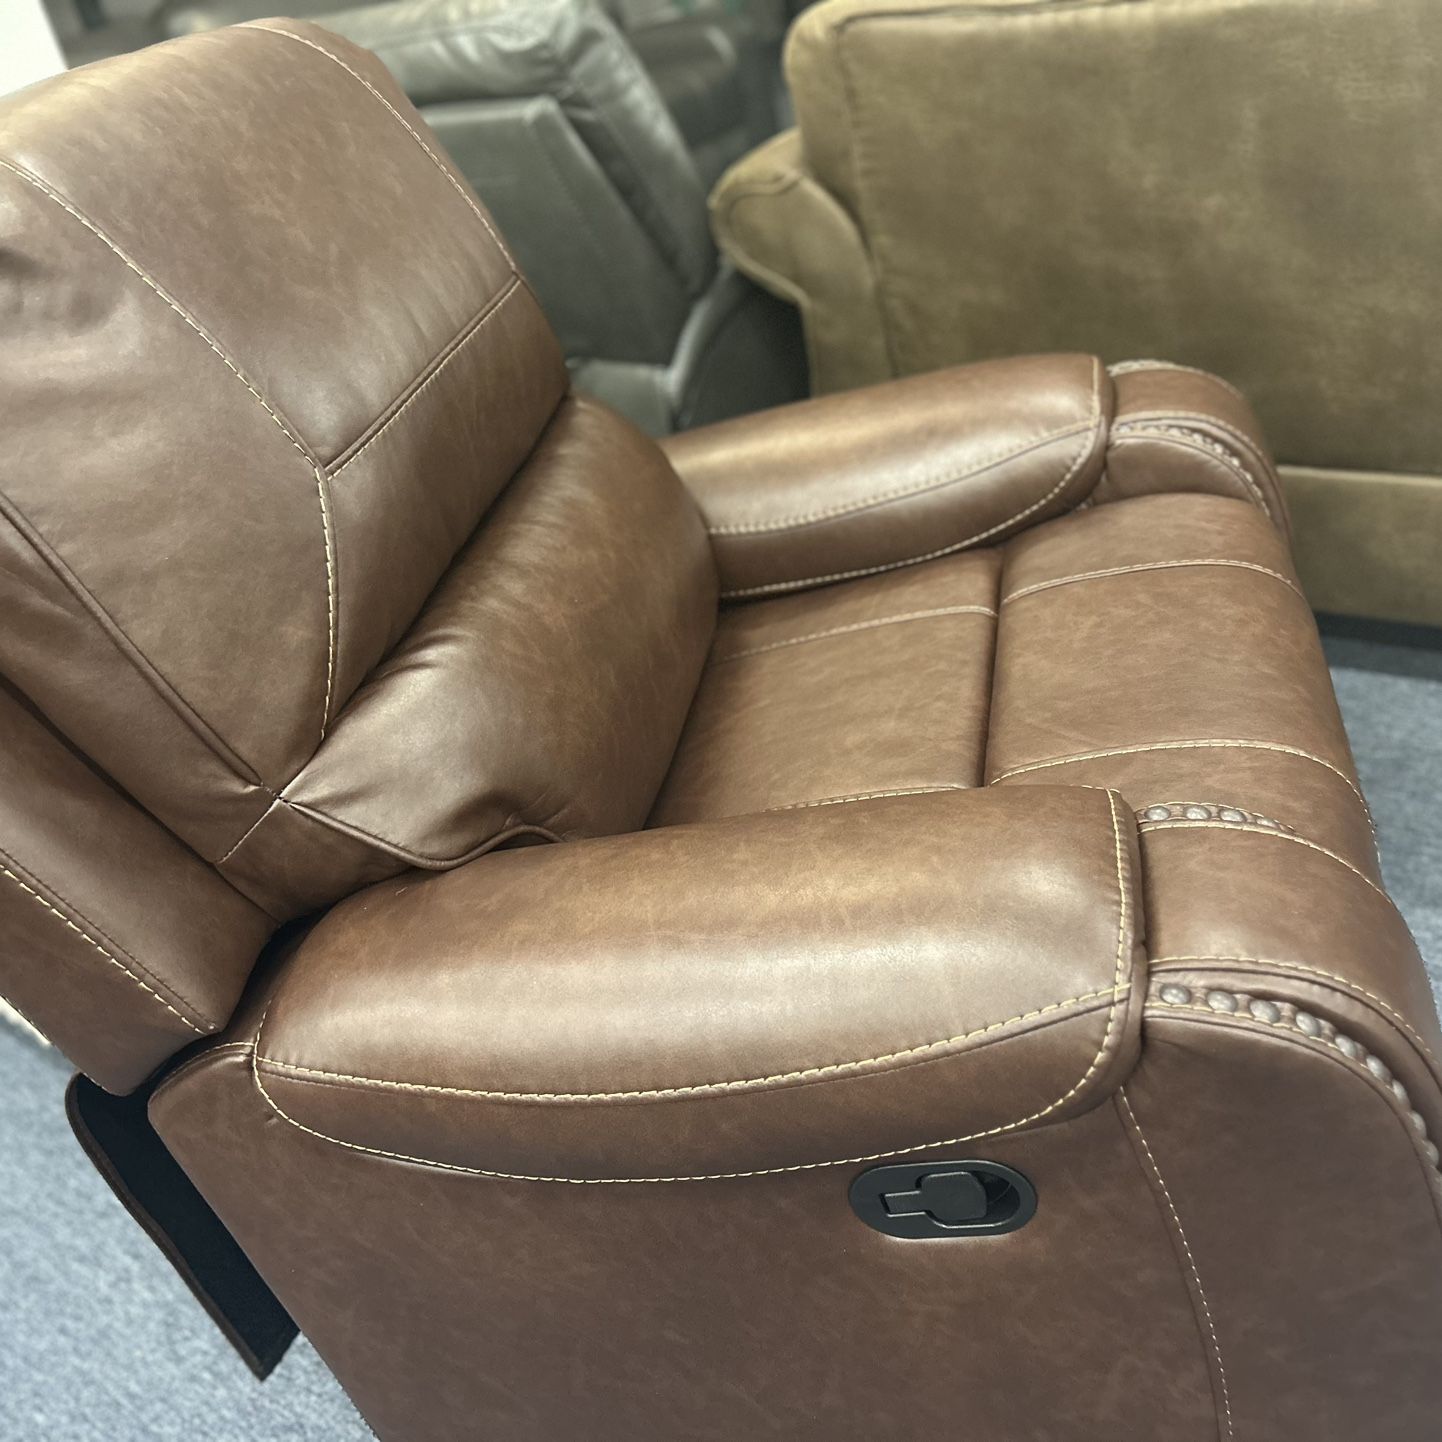 Leather Reclining Chairs 